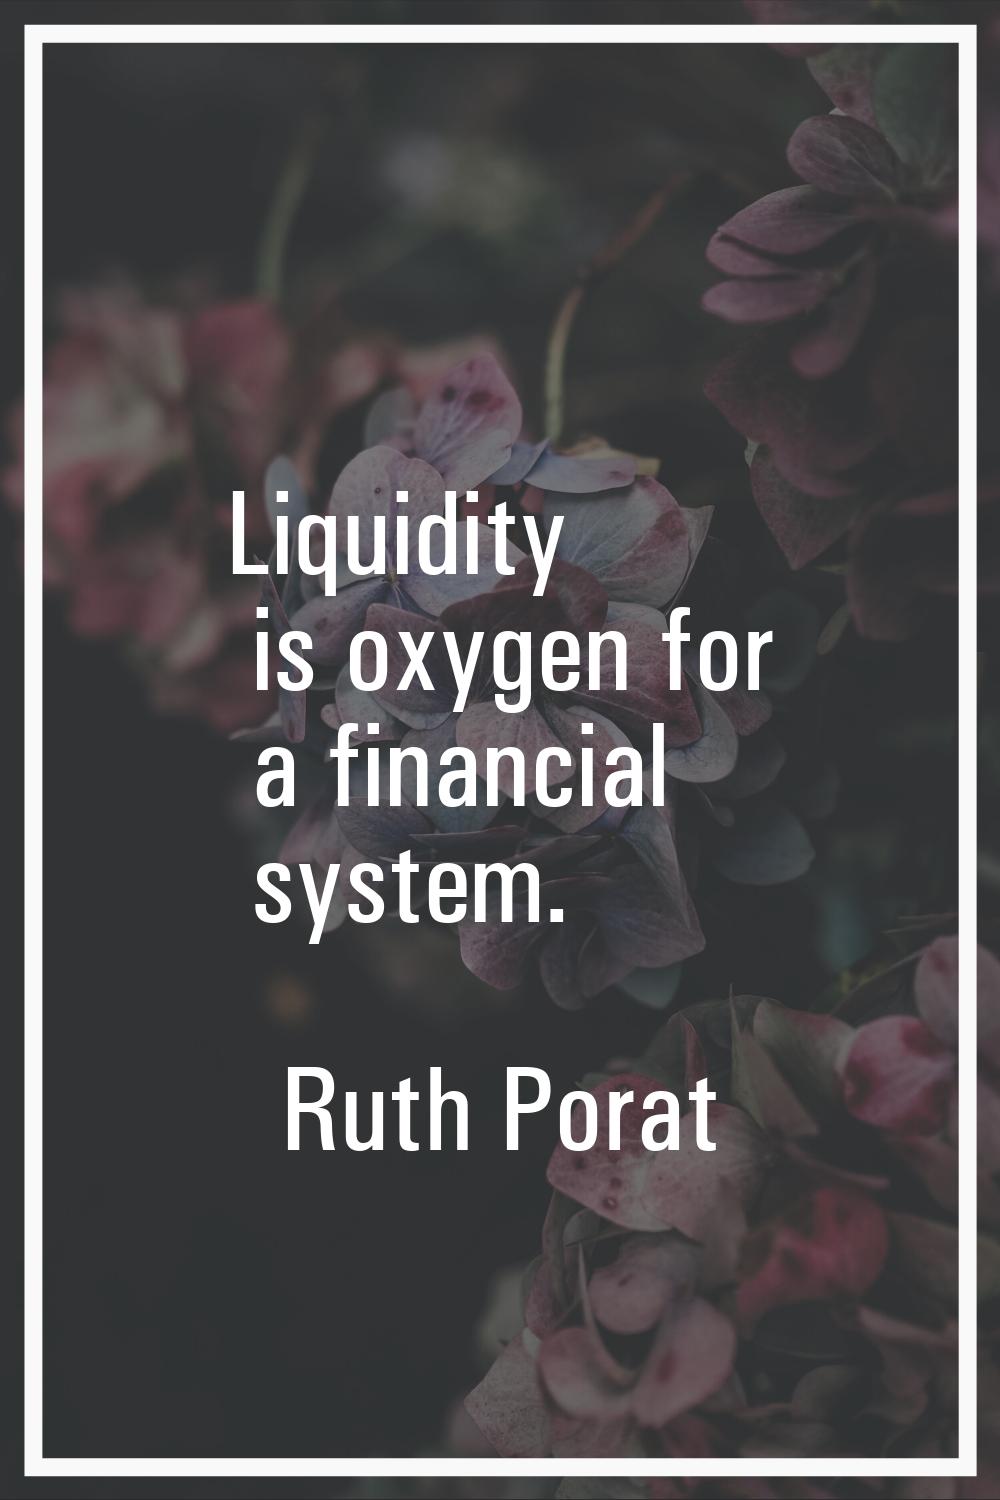 Liquidity is oxygen for a financial system.